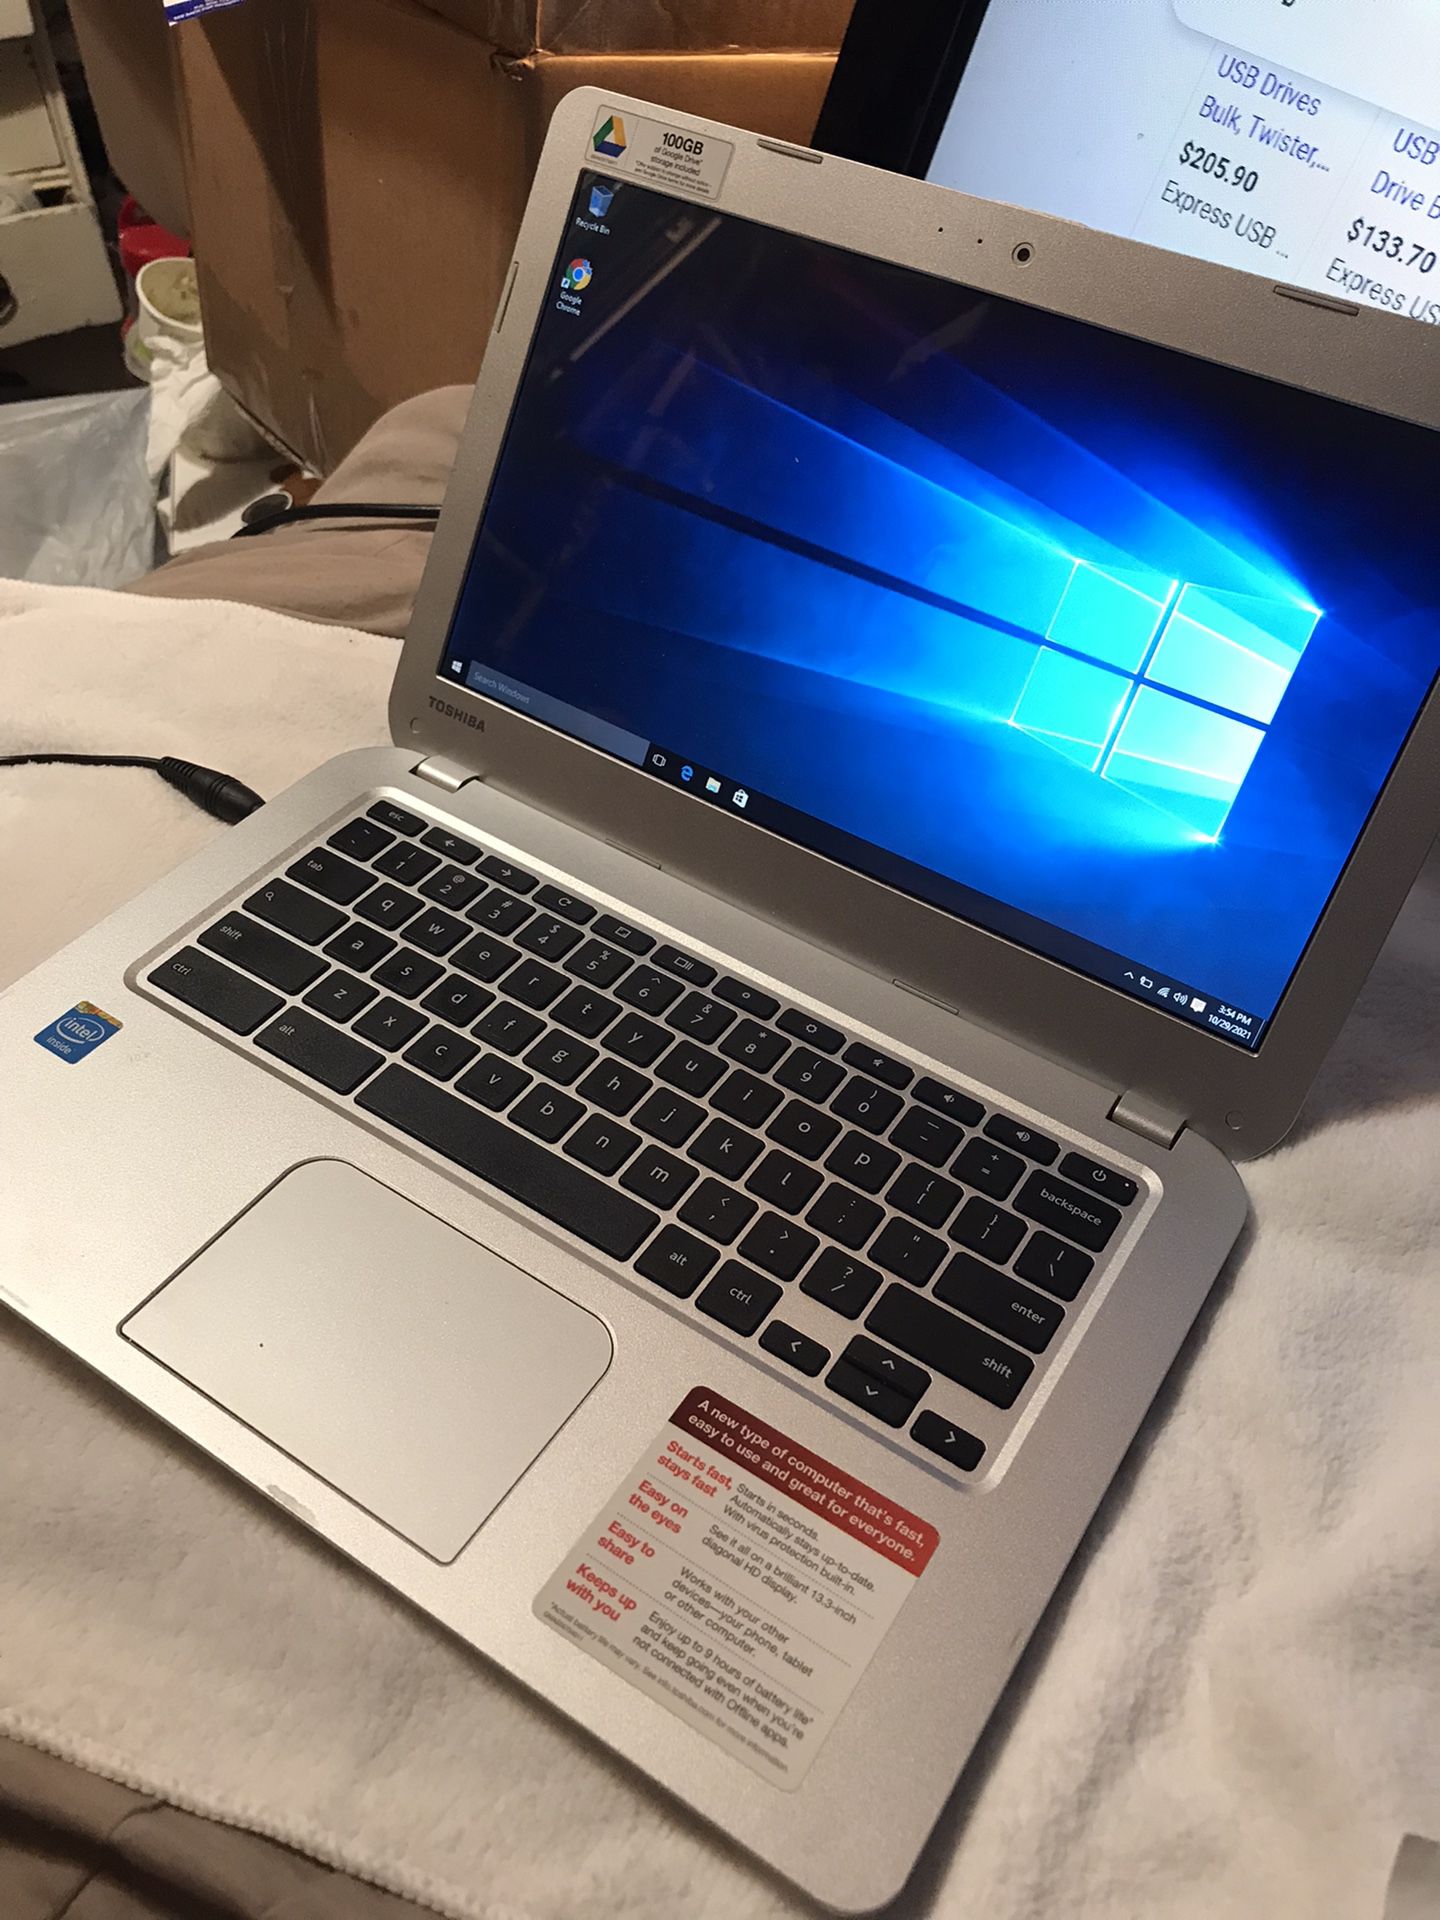 Laptop Toshiba Windows Pro 10 ,fast  16GB SSD 2GB RAM  All In Great  Condition  Battery Perfect Web Cam / Chargers / Hdmi Port 03. Usb /$119 